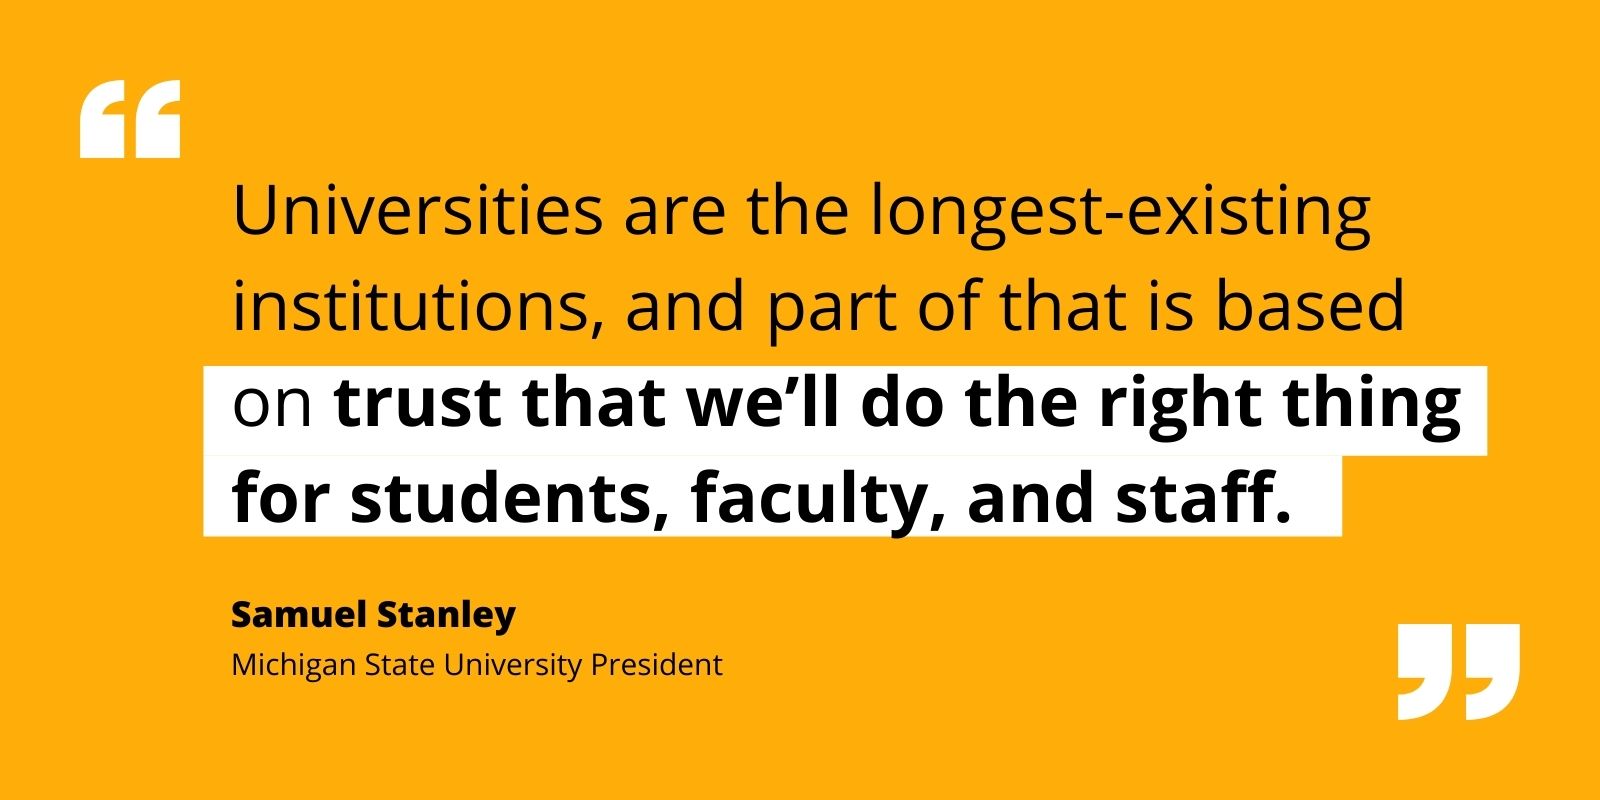 Quote by Samuel Stanley re universities' longevity depending on trust about doing the right thing for all stakeholders.